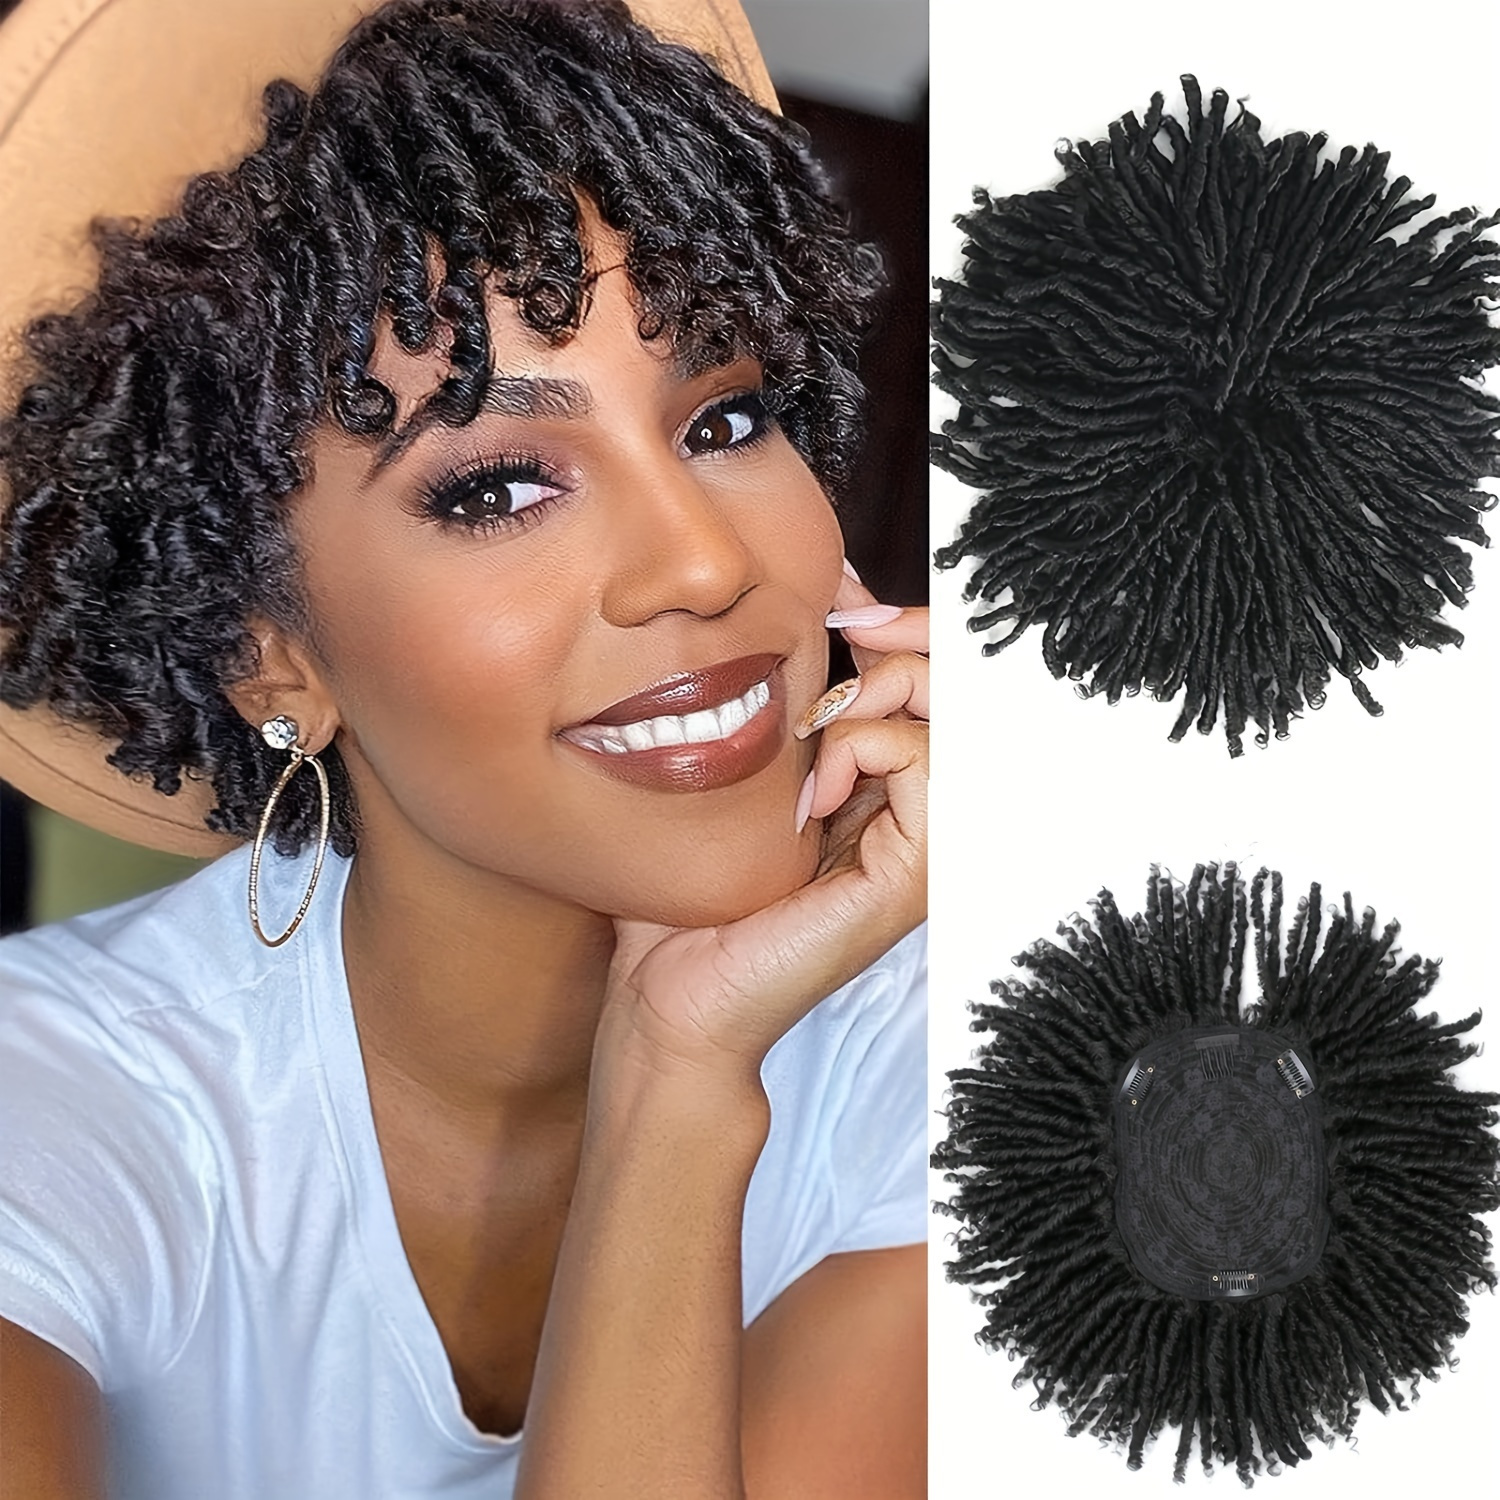 

6 Inch Dreadlock Hair Toppers With Clip In Braided Hair Half Wigs For Women Short Synthetic Dreadlocks Hair Pieces Toupee Afro Hair For Women And Men Topper Wiglets Hairpieces For Thinning Hair